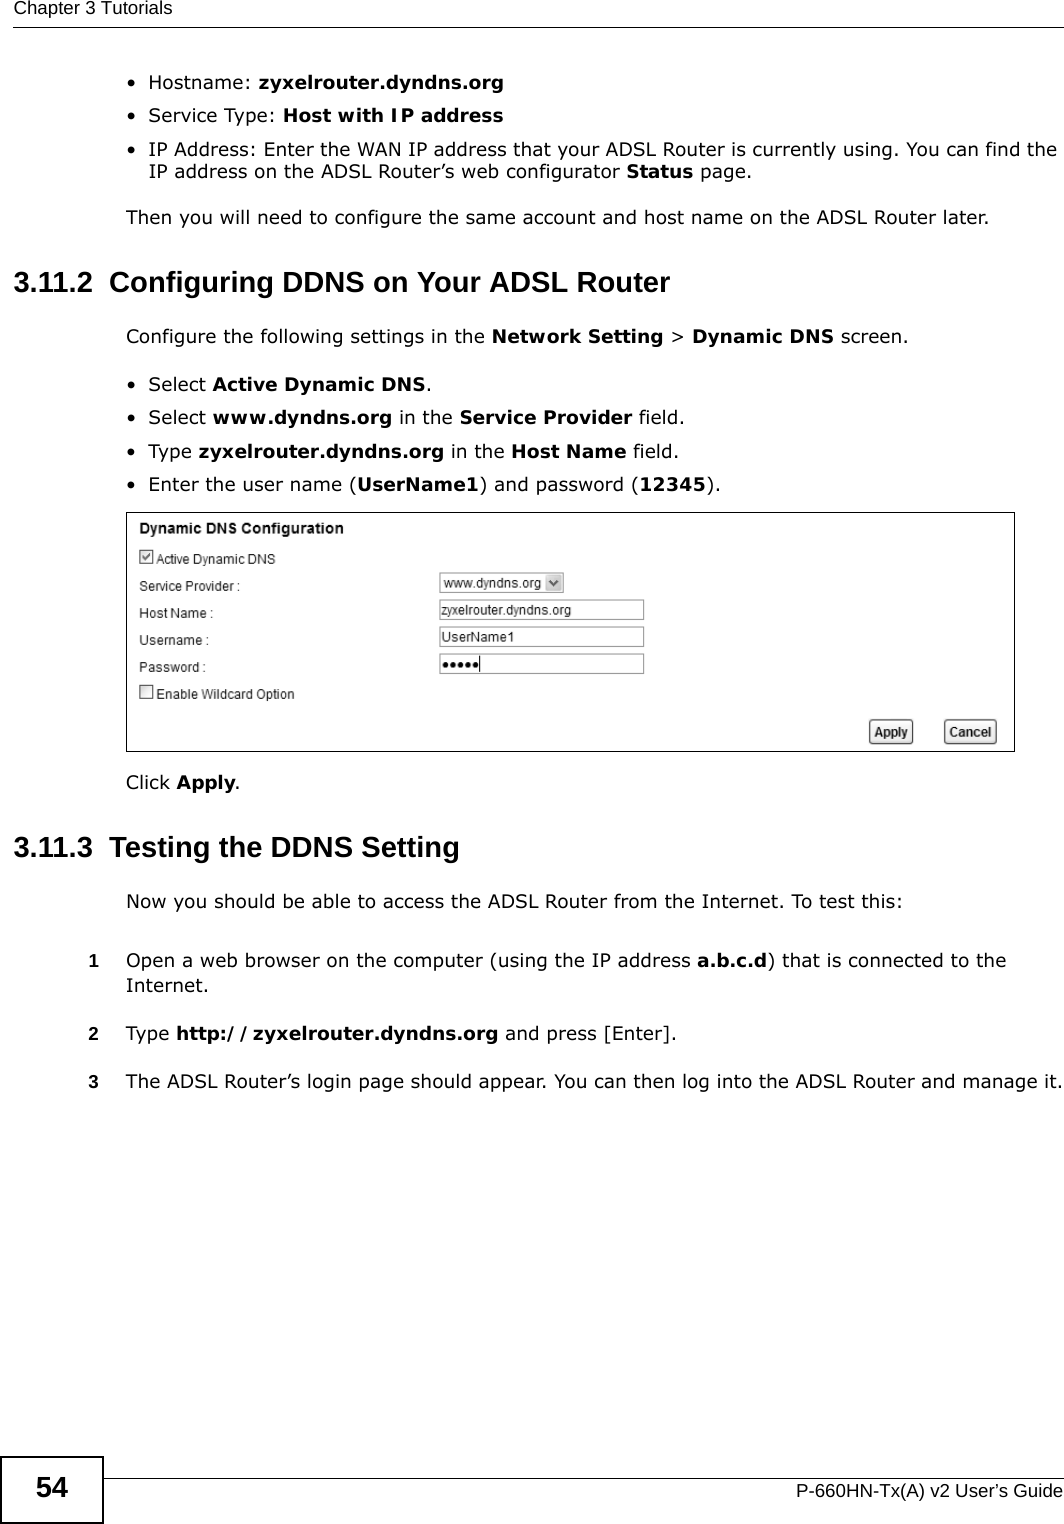 Chapter 3 TutorialsP-660HN-Tx(A) v2 User’s Guide54•Hostname: zyxelrouter.dyndns.org•Service Type: Host with IP address• IP Address: Enter the WAN IP address that your ADSL Router is currently using. You can find the IP address on the ADSL Router’s web configurator Status page.Then you will need to configure the same account and host name on the ADSL Router later.3.11.2  Configuring DDNS on Your ADSL RouterConfigure the following settings in the Network Setting &gt; Dynamic DNS screen.•Select Active Dynamic DNS.•Select www.dyndns.org in the Service Provider field.•Type zyxelrouter.dyndns.org in the Host Name field.• Enter the user name (UserName1) and password (12345).Click Apply.3.11.3  Testing the DDNS SettingNow you should be able to access the ADSL Router from the Internet. To test this:1Open a web browser on the computer (using the IP address a.b.c.d) that is connected to the Internet.2Type http://zyxelrouter.dyndns.org and press [Enter].3The ADSL Router’s login page should appear. You can then log into the ADSL Router and manage it.